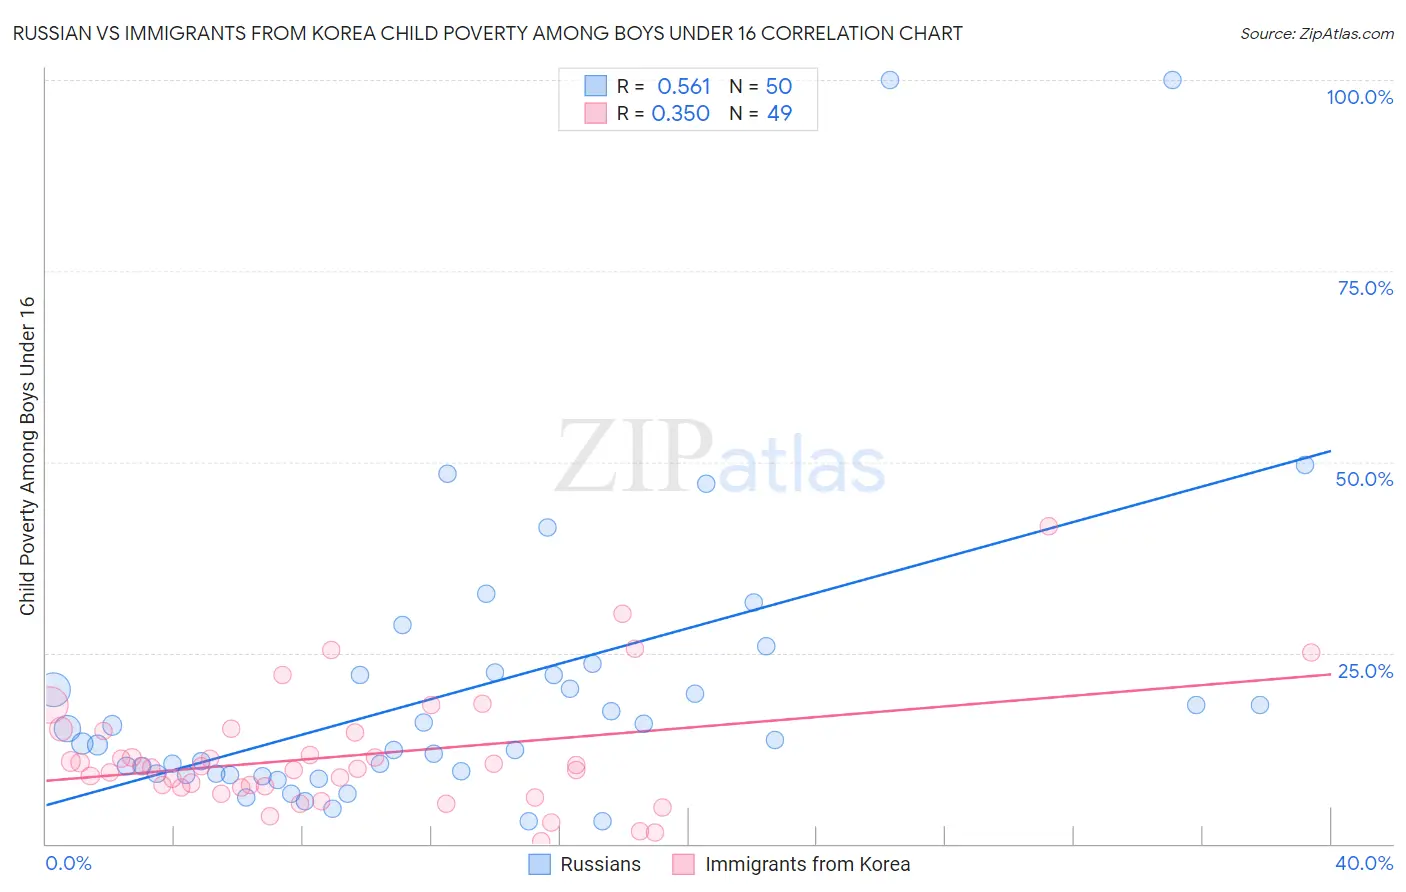 Russian vs Immigrants from Korea Child Poverty Among Boys Under 16